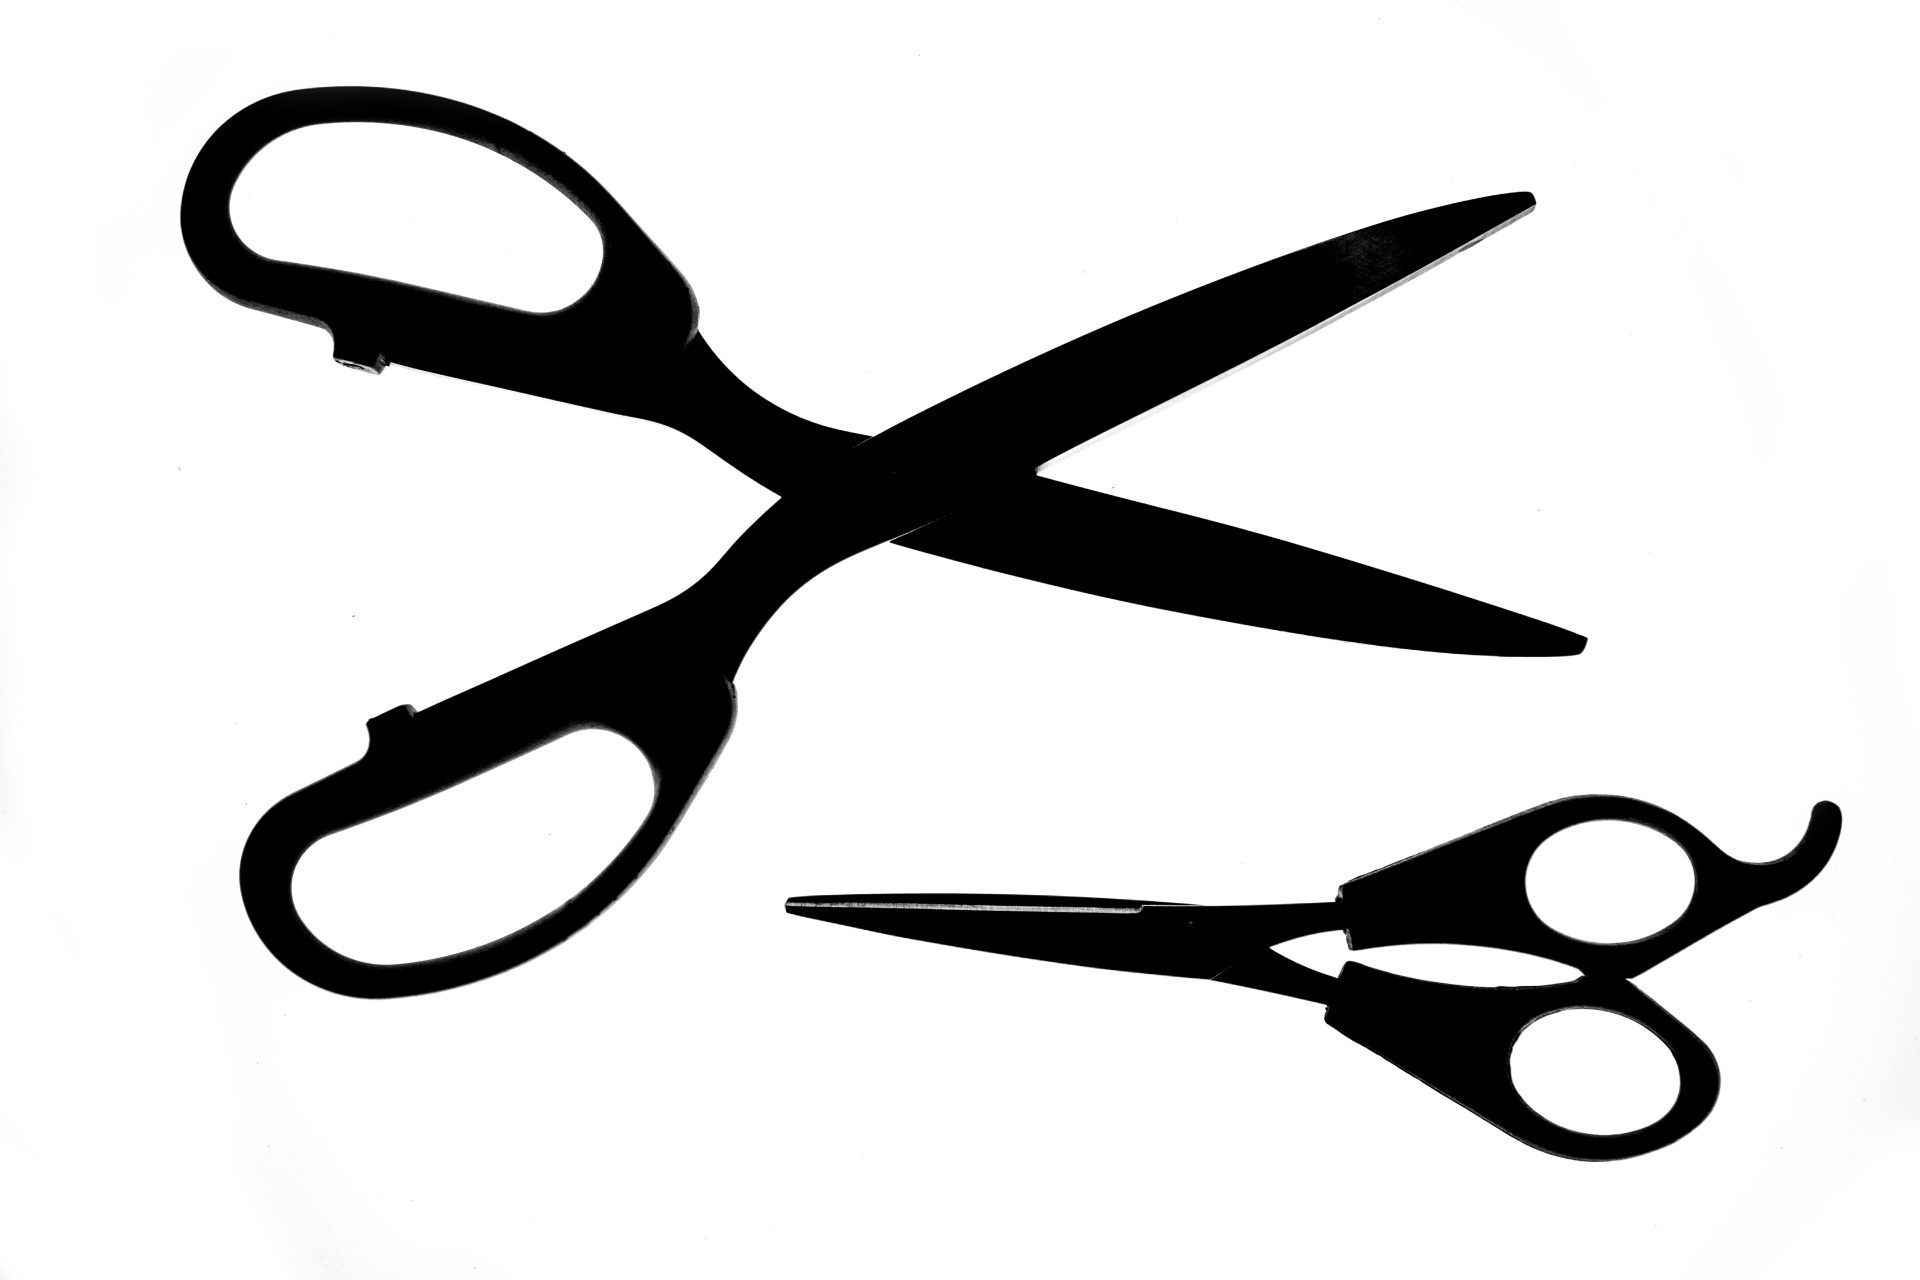 Scissors Silhouette On The White Background